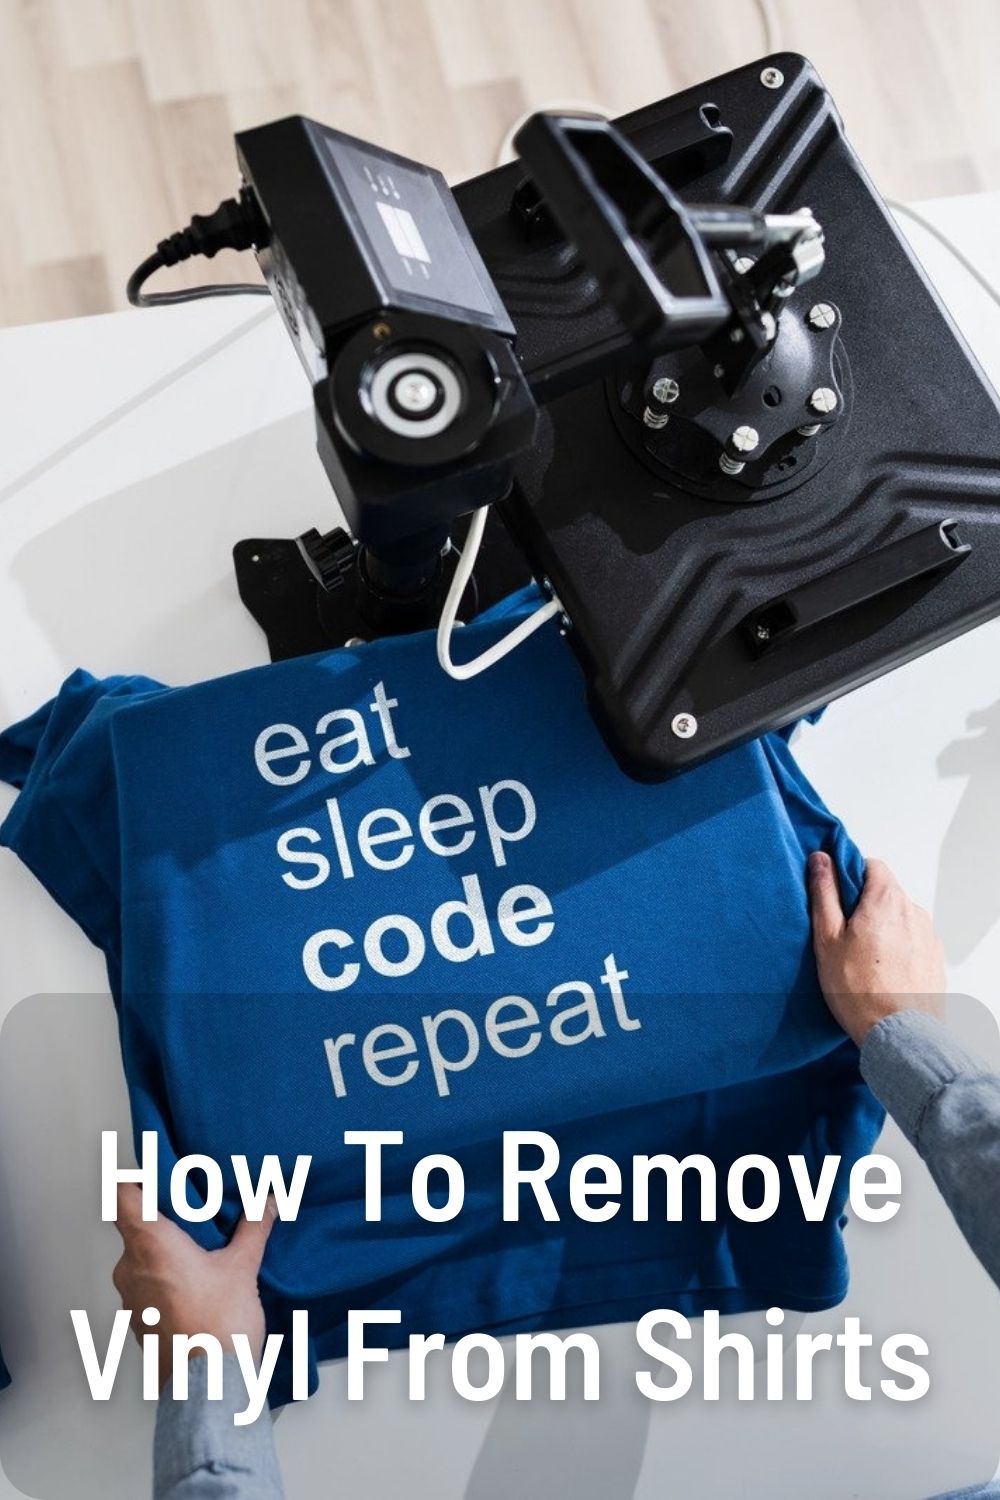 How To Remove Vinyl From Shirts